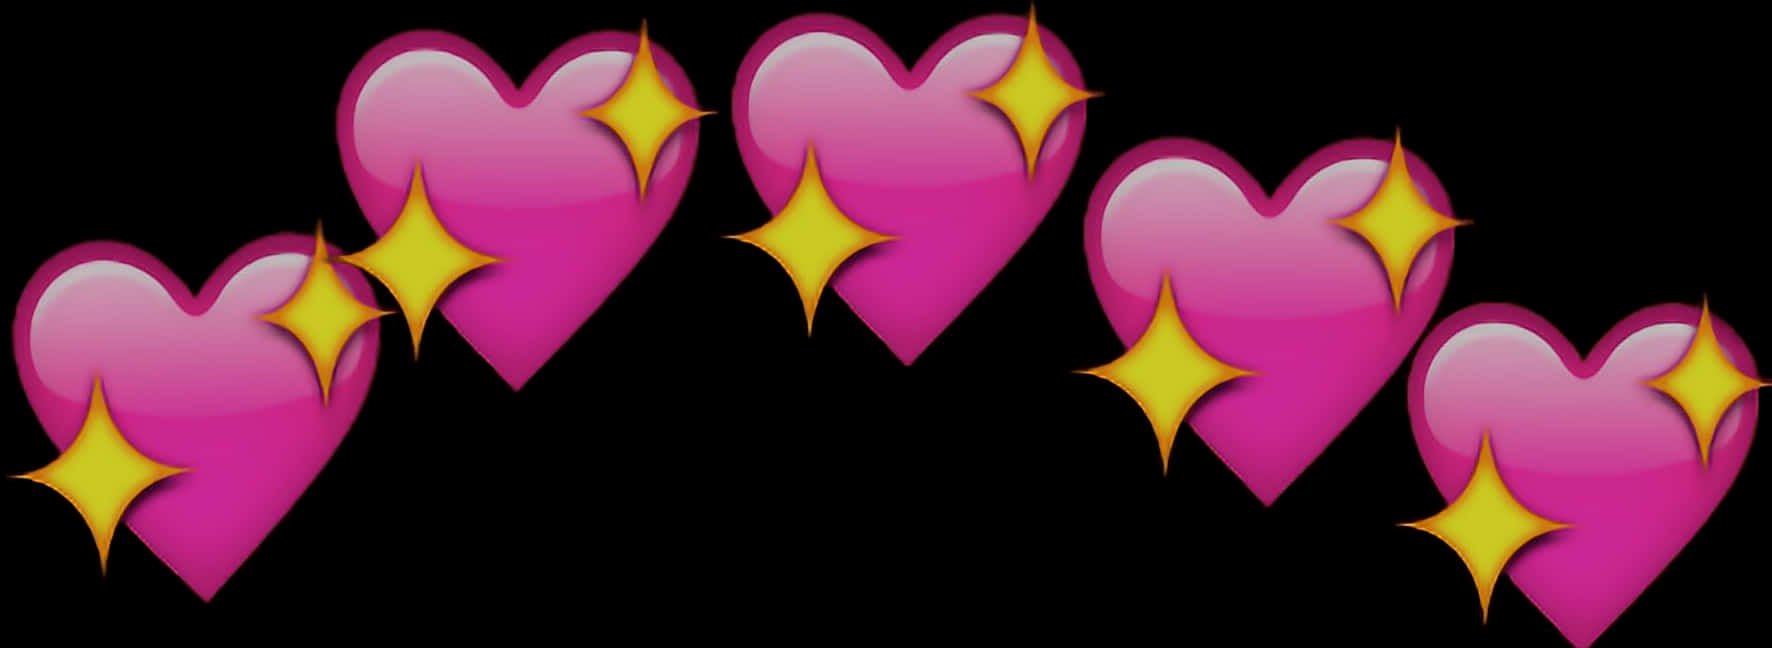 A Pink Hearts With Yellow Stars